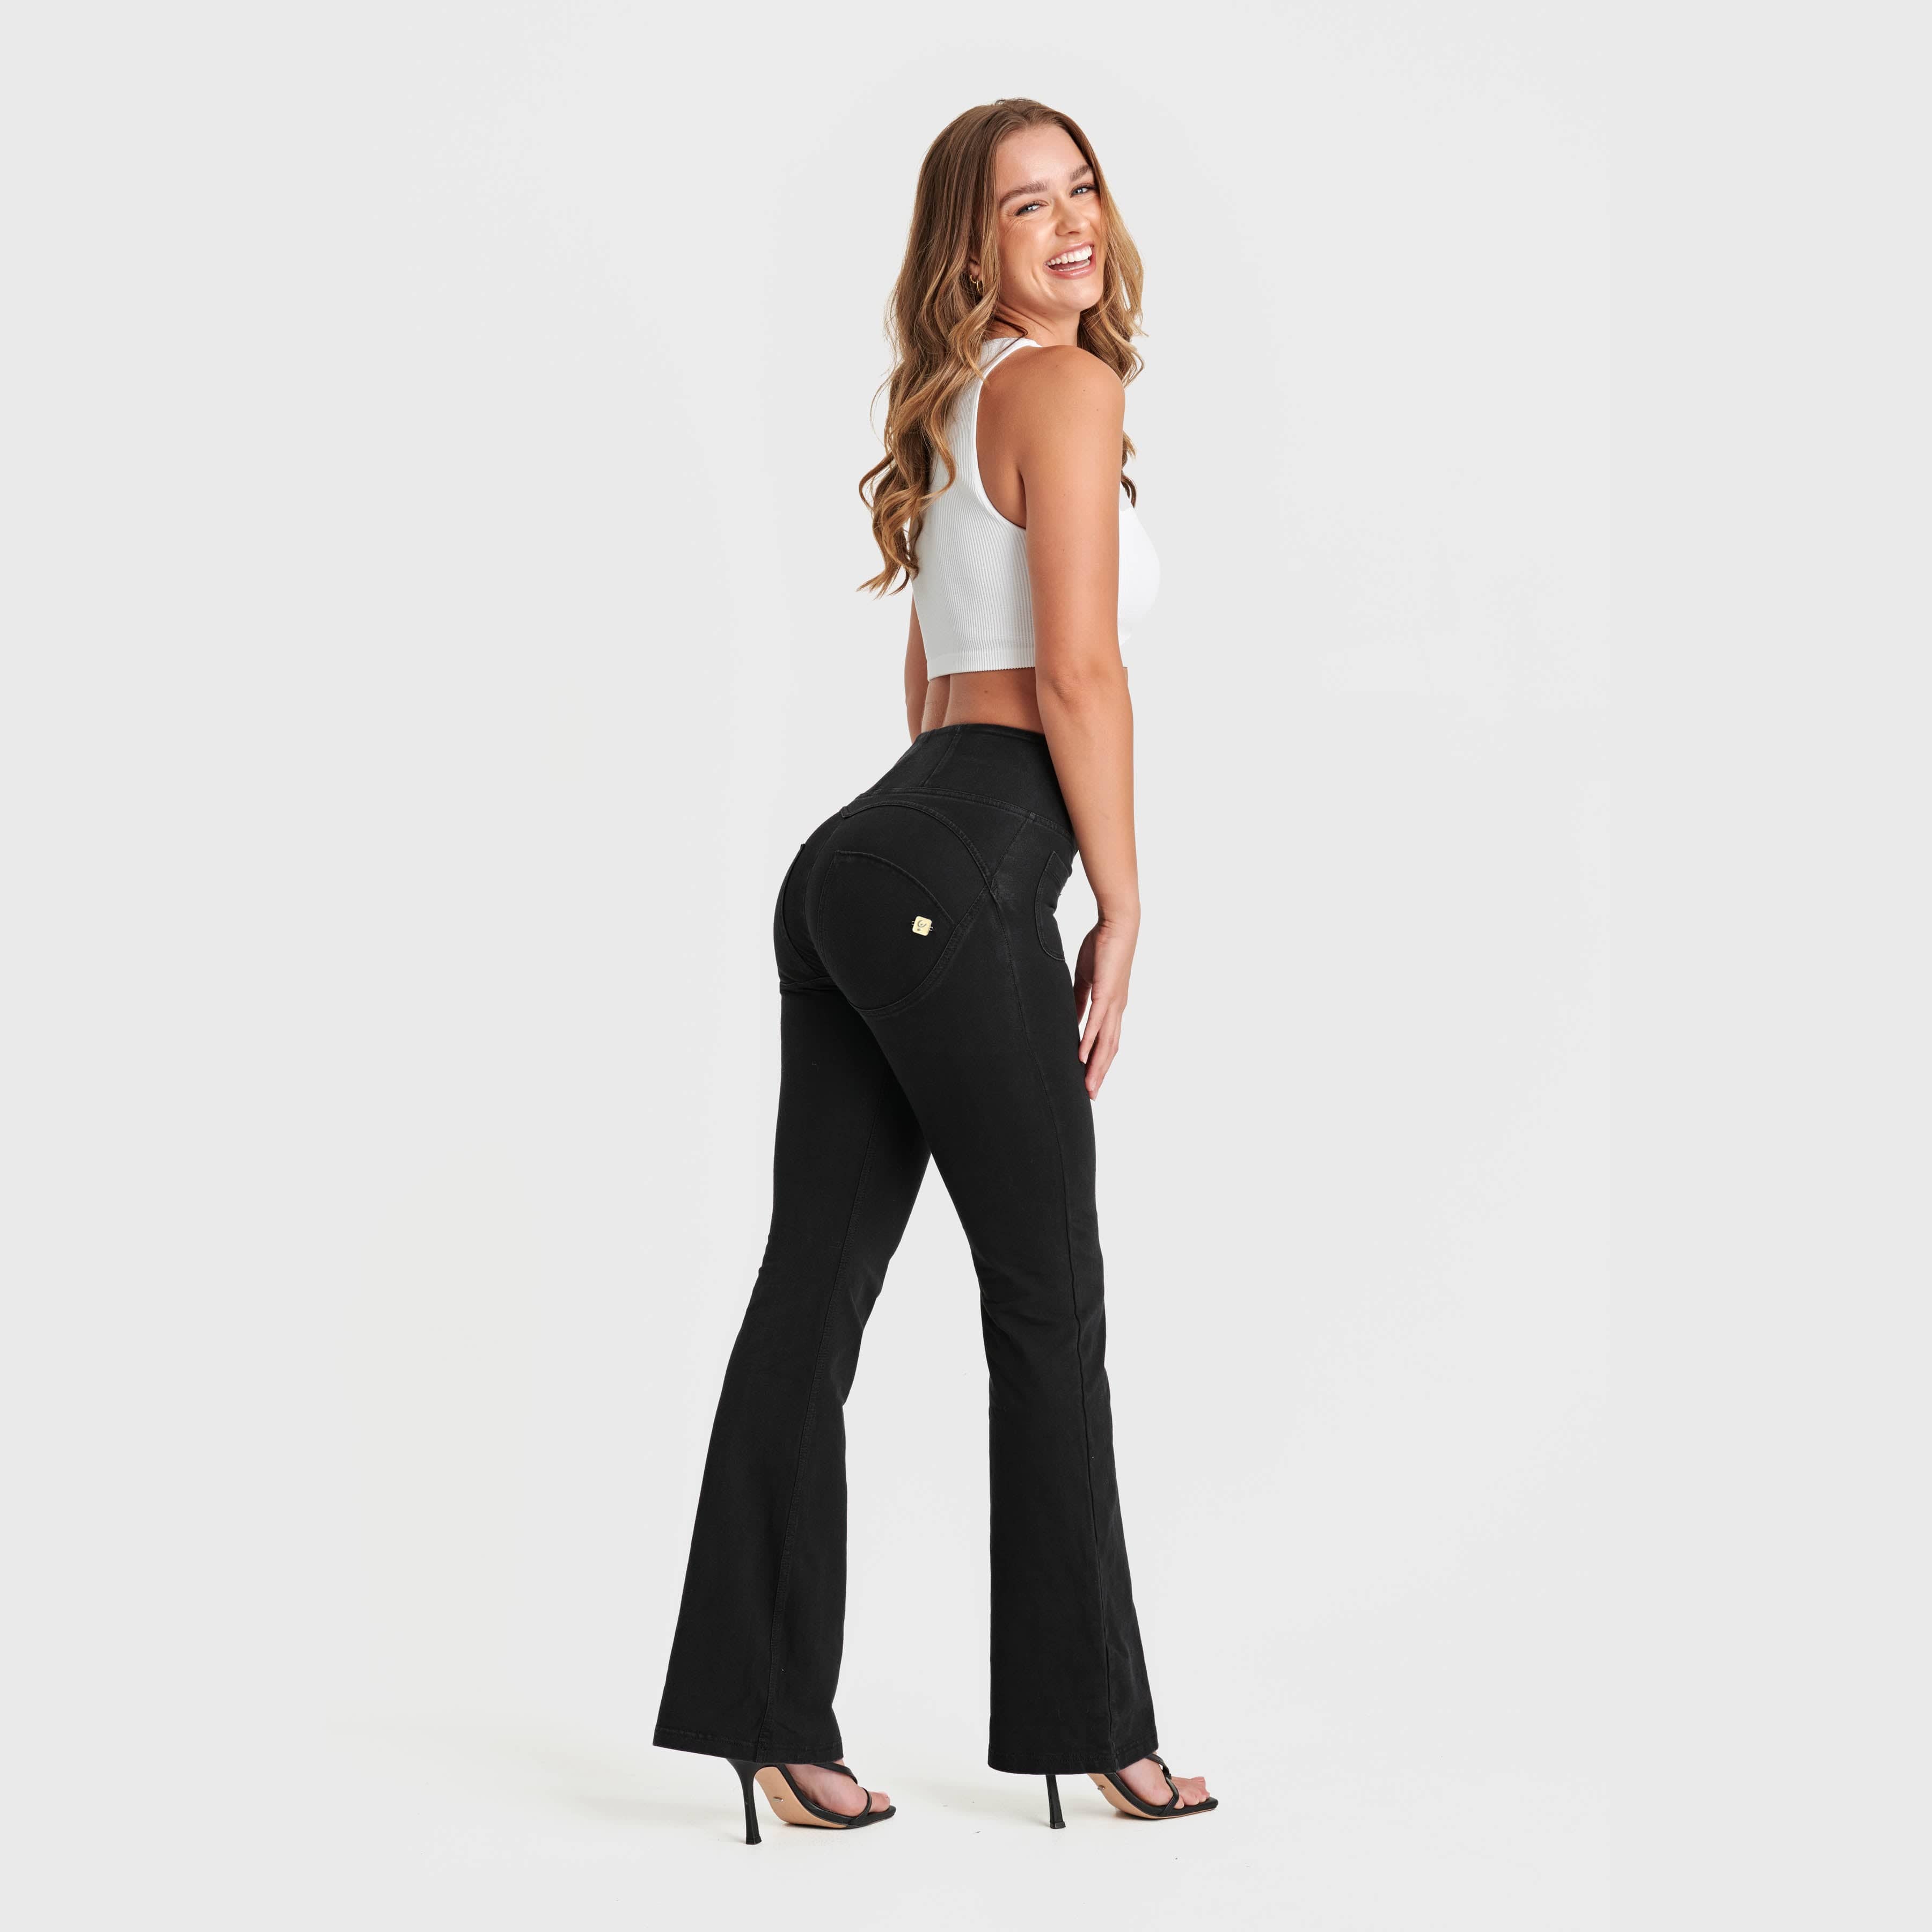 WR.UP® Denim with Front Pockets - Super High Waisted - Flare - Black + Black Stitching 1